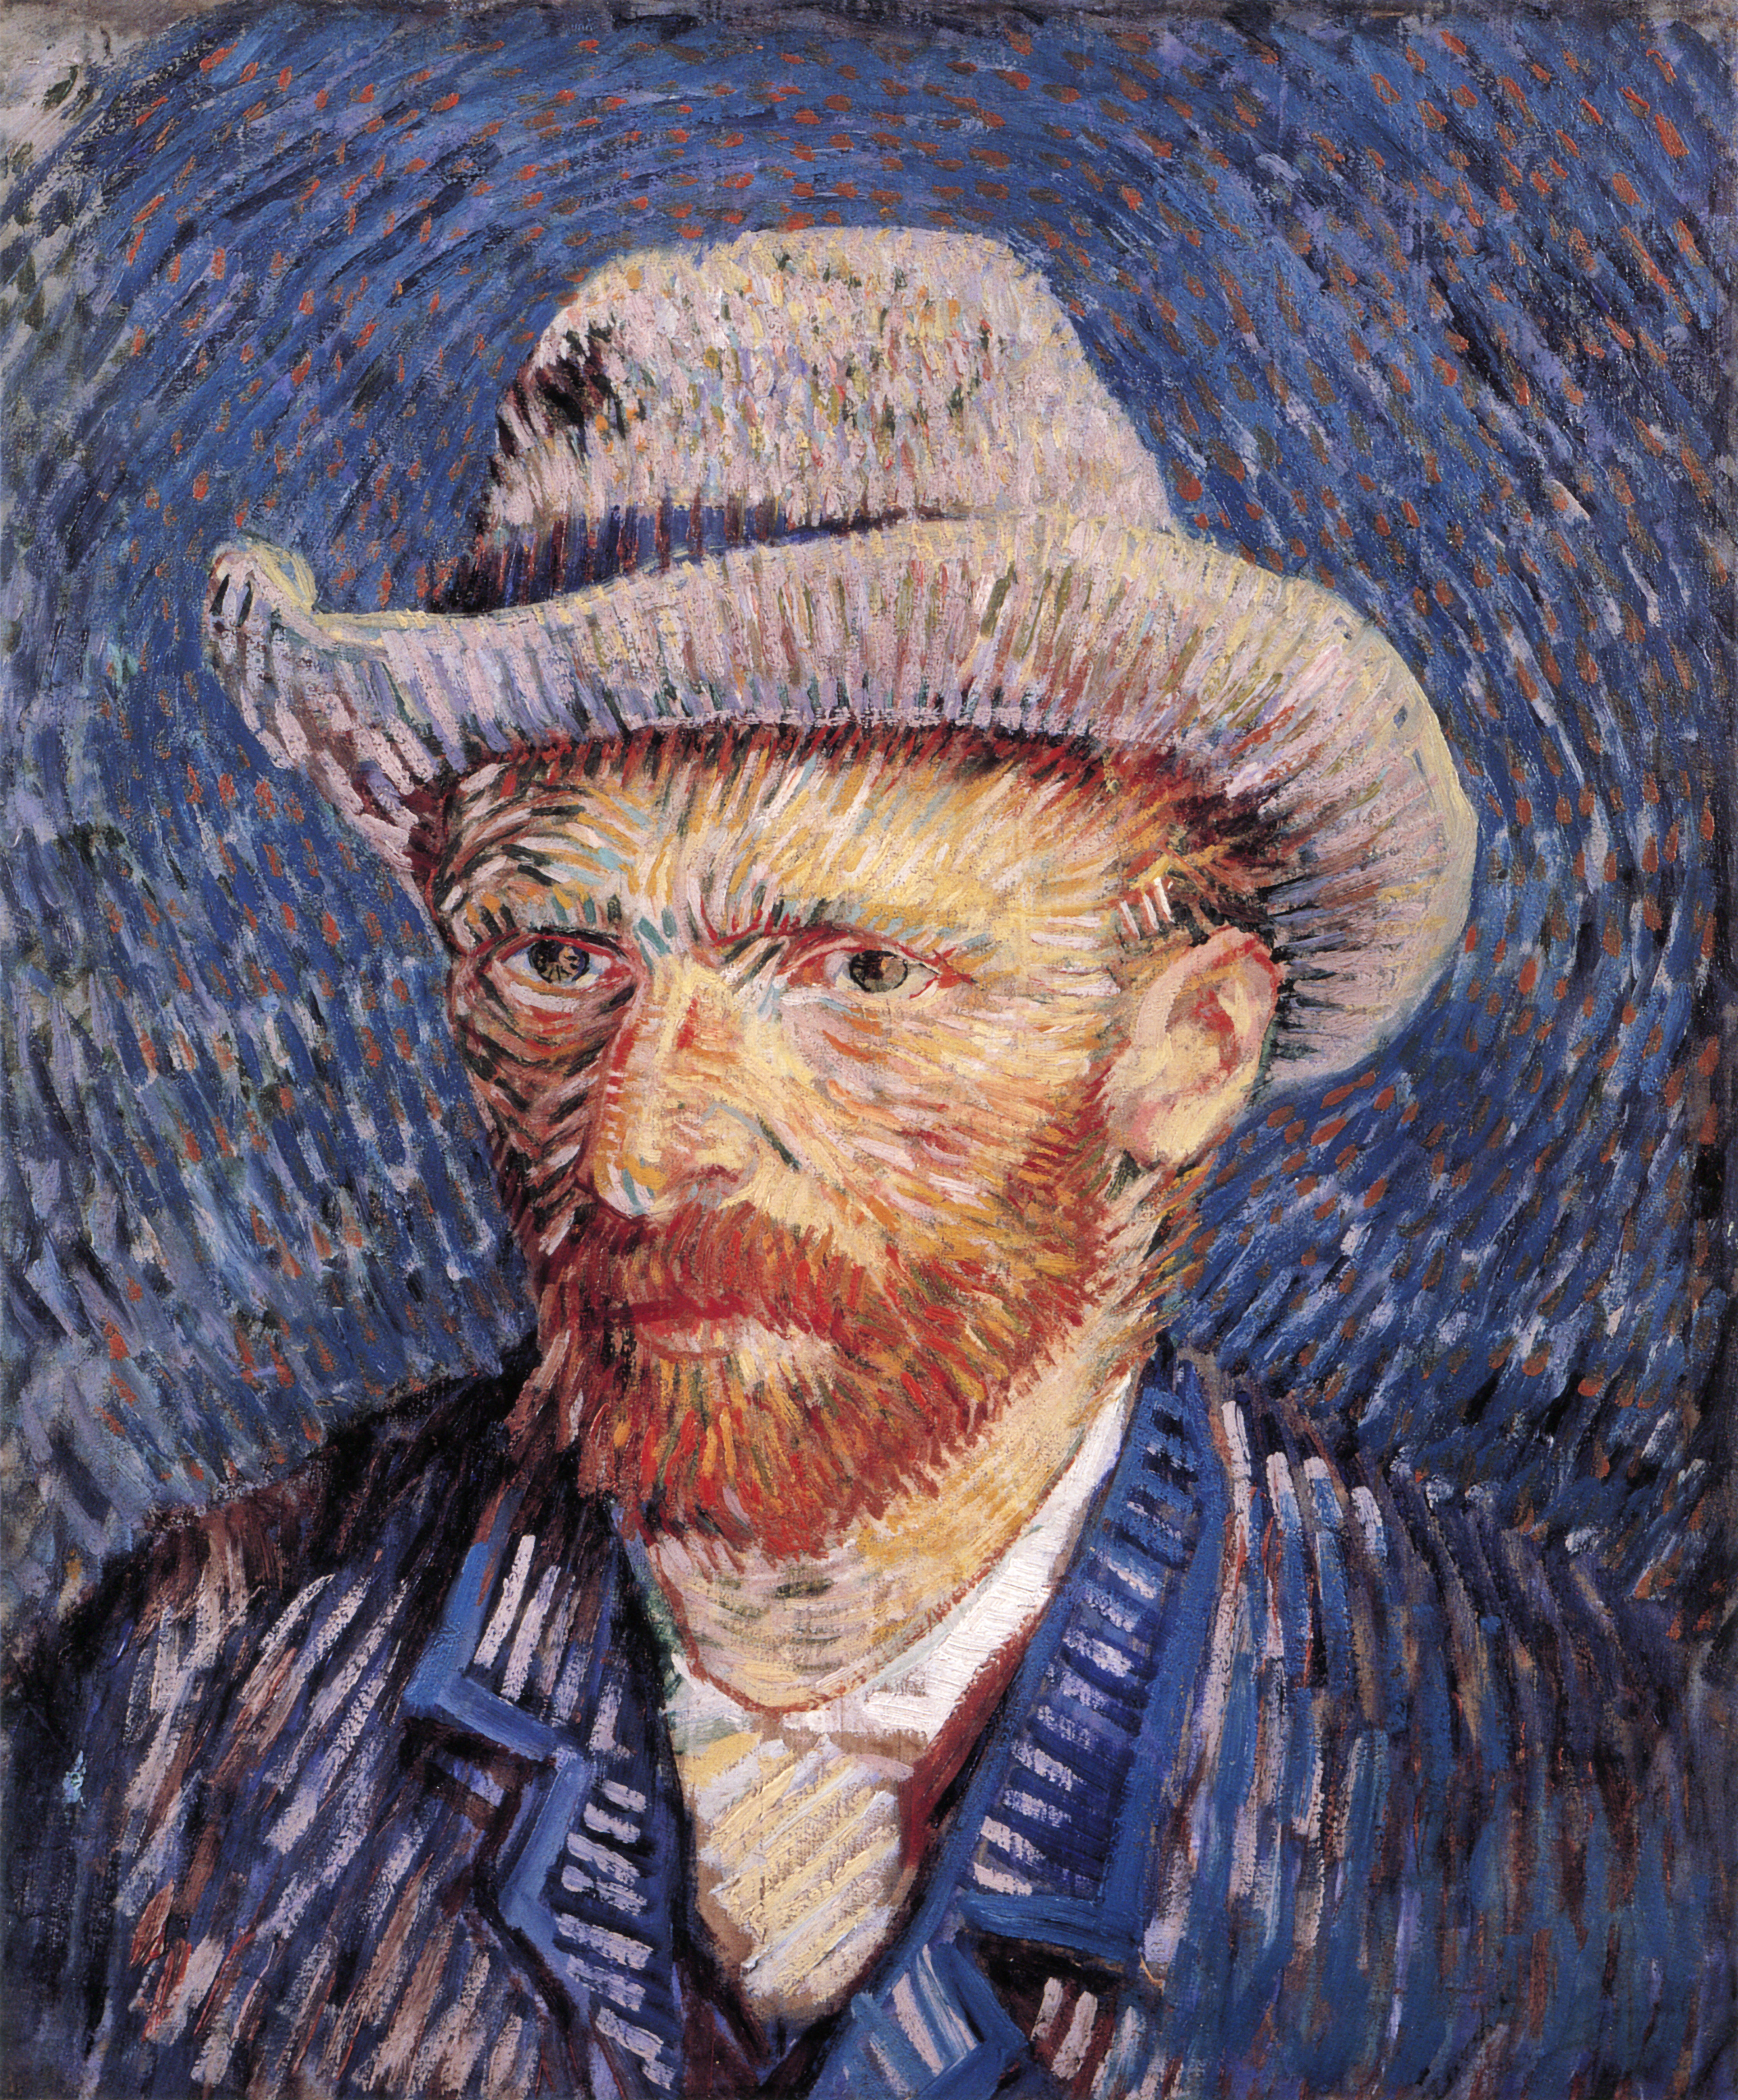 http://upload.wikimedia.org/wikipedia/commons/8/8e/Self-portrait_with_Felt_Hat_by_Vincent_van_Gogh.jpg